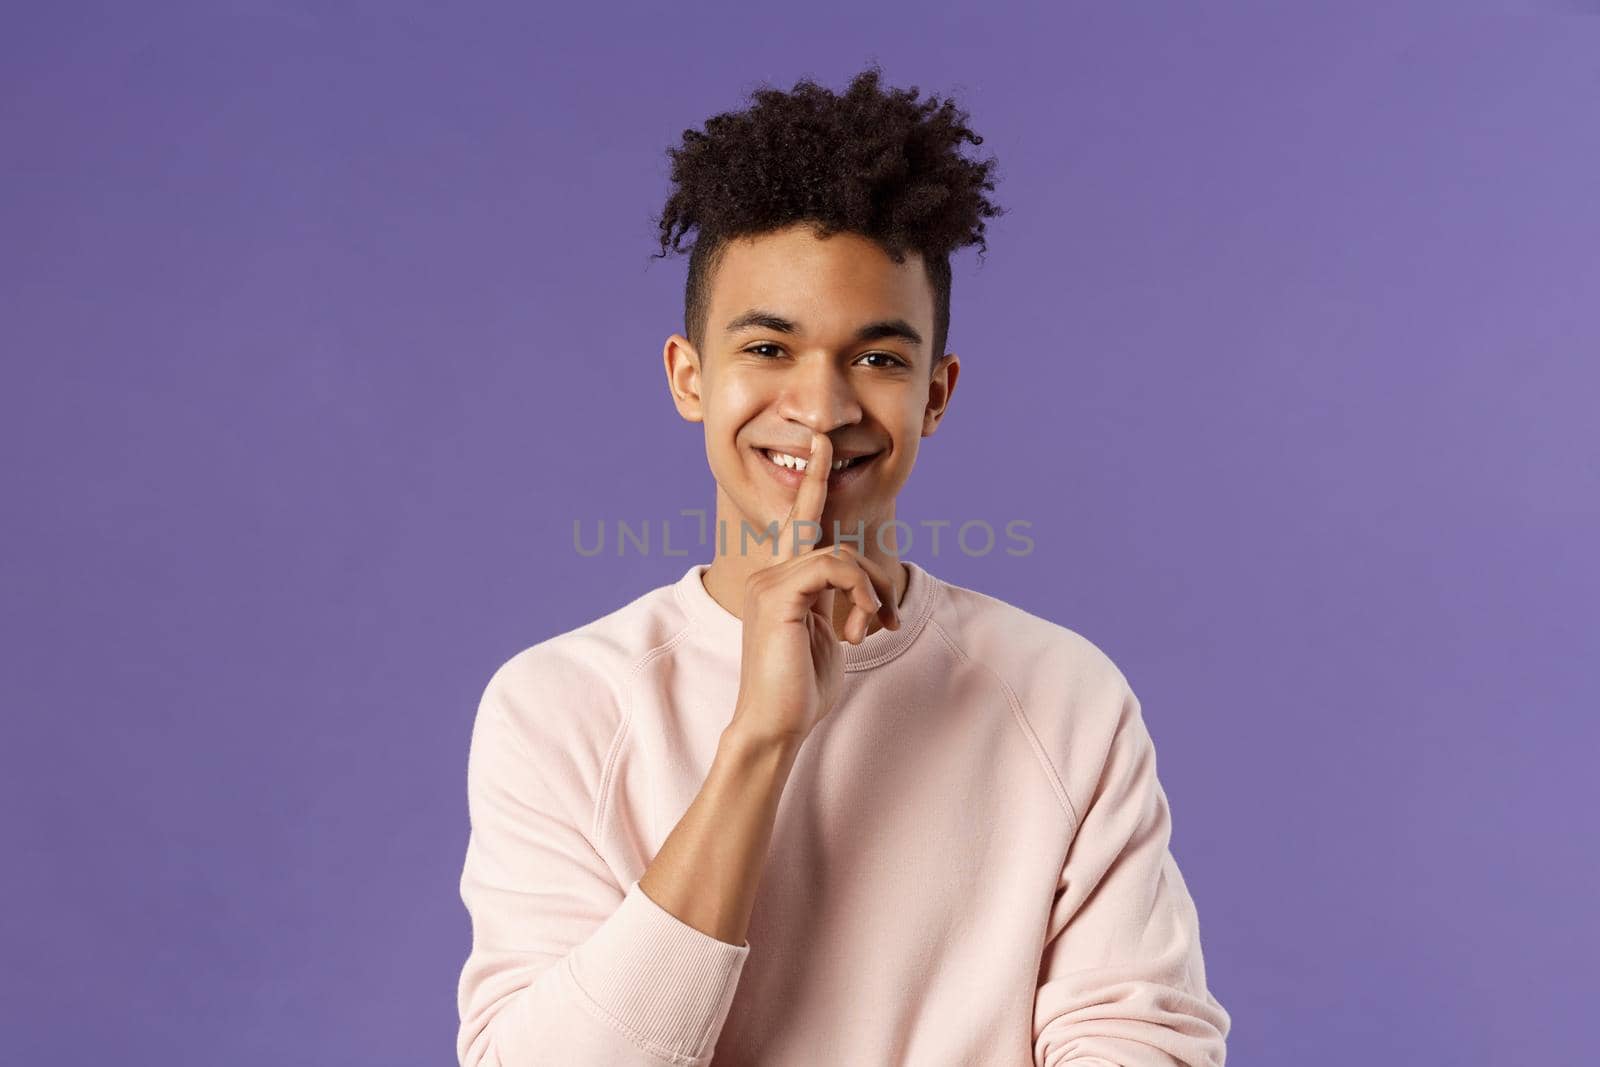 Close-up portrait of attractive smiling young man hiding secret, asking keep silent or quiet to do surprise, show shush gesture, place index finger to mouth, standing purple background.